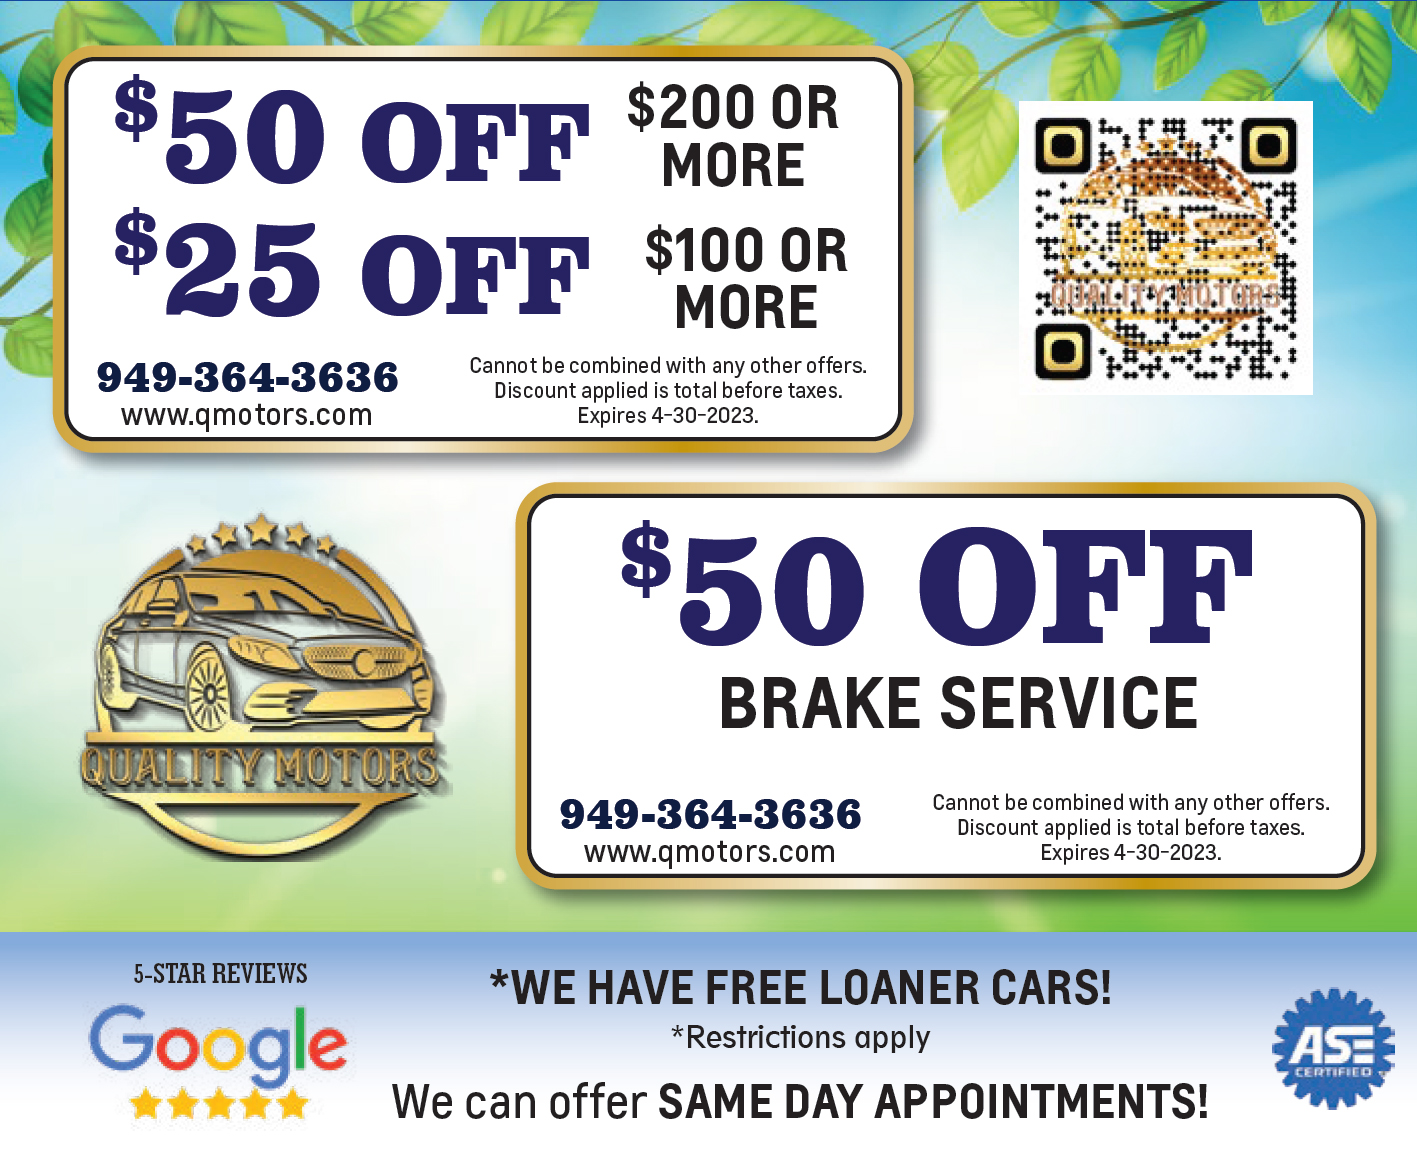 50 US dollars off service $200 or more, 25 US dollars off for service of $100-199. $50 off brake service, mention specials upon booking only one special may be used at one visit/ vehicle.